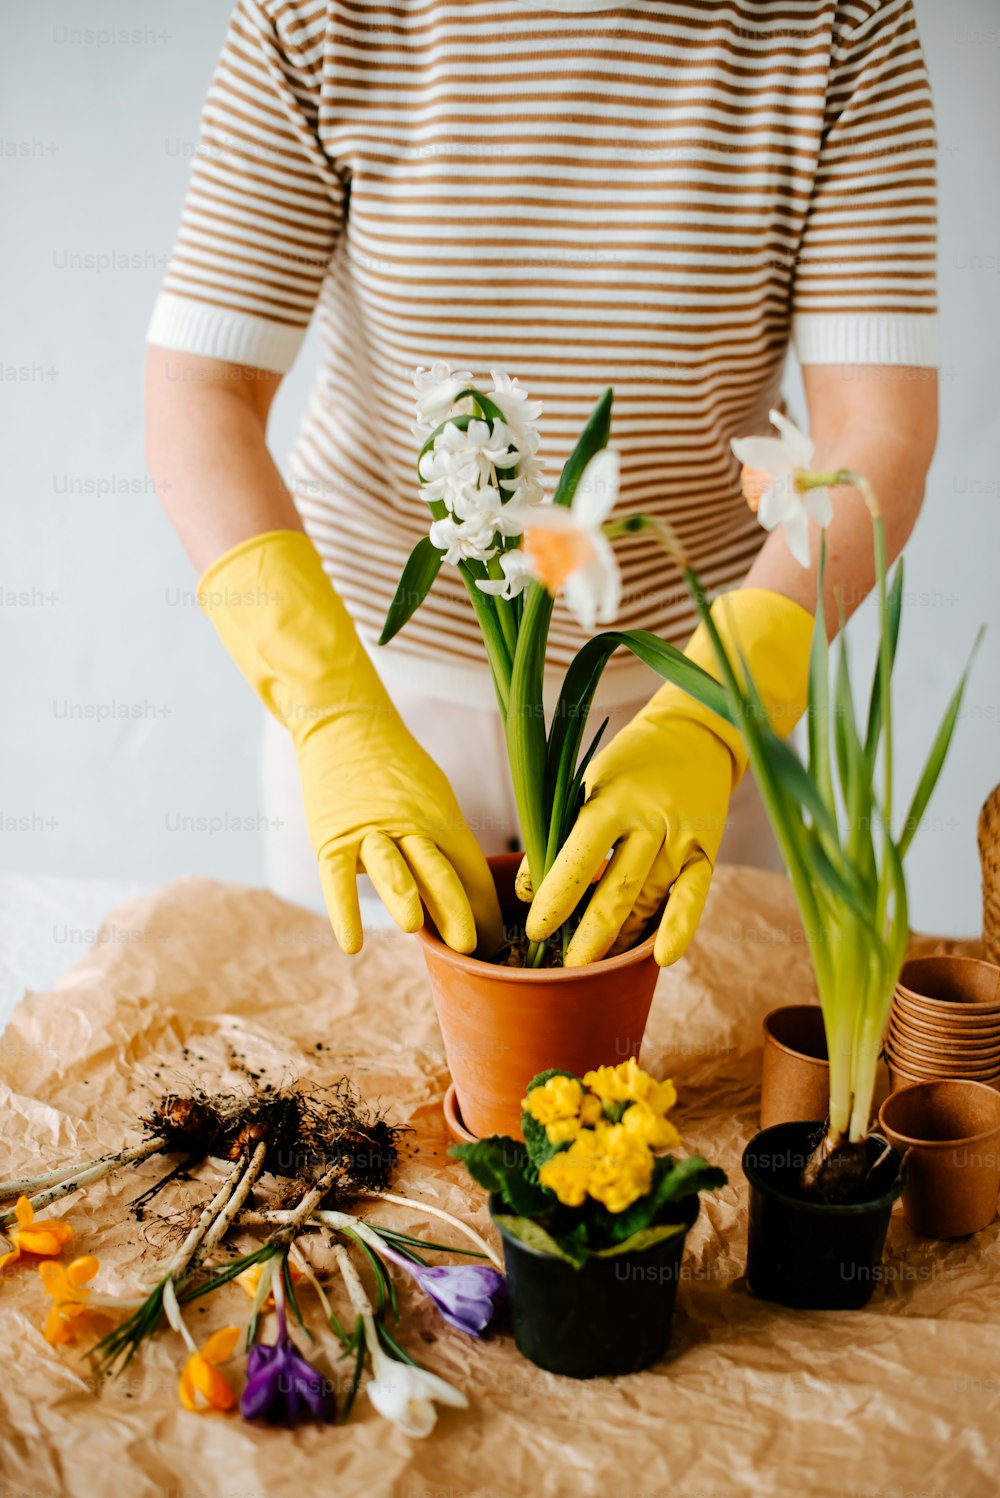 a person wearing yellow gloves and gardening gloves